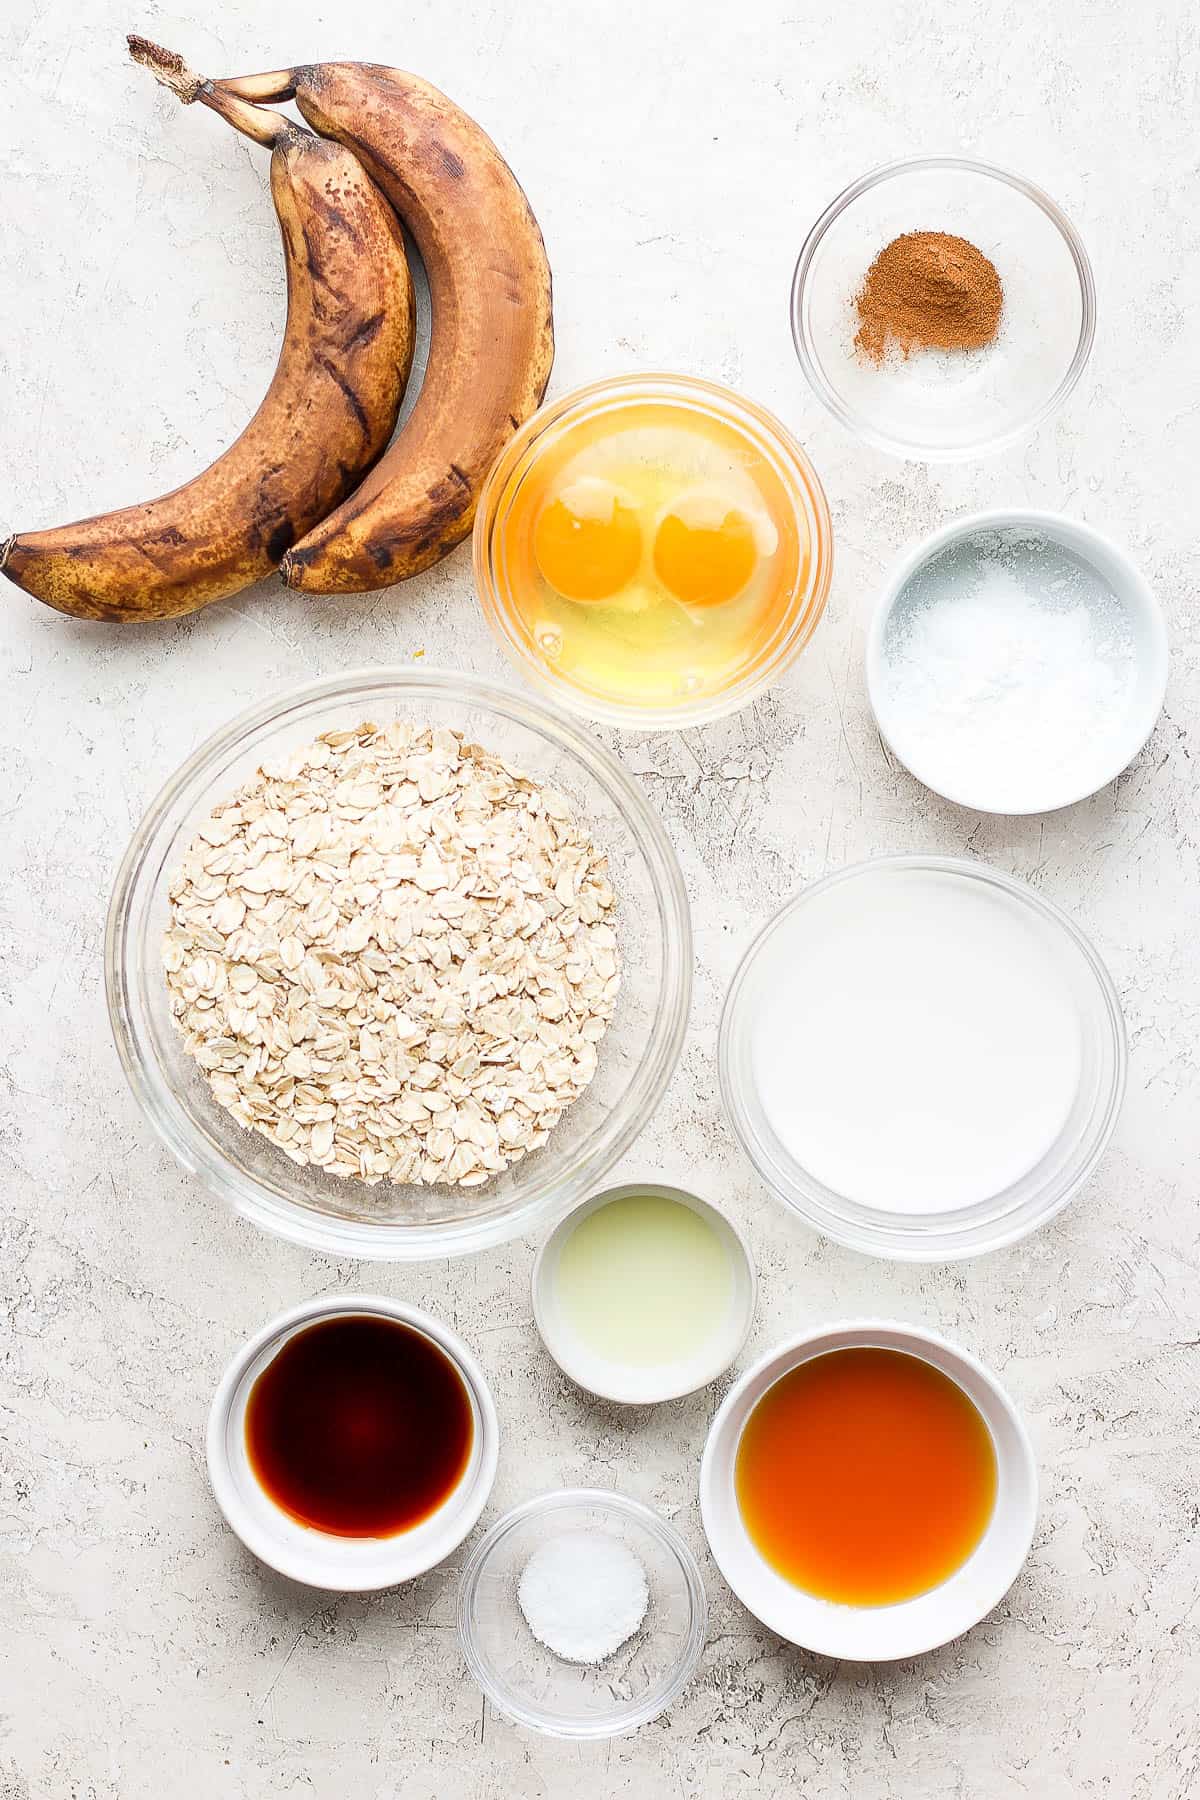 An ingredient shot showing two ripe bananas and individual containers of egg, oats, cinnamon, almond milk, vanilla, salt, baking powder, and mini chocolate chips.